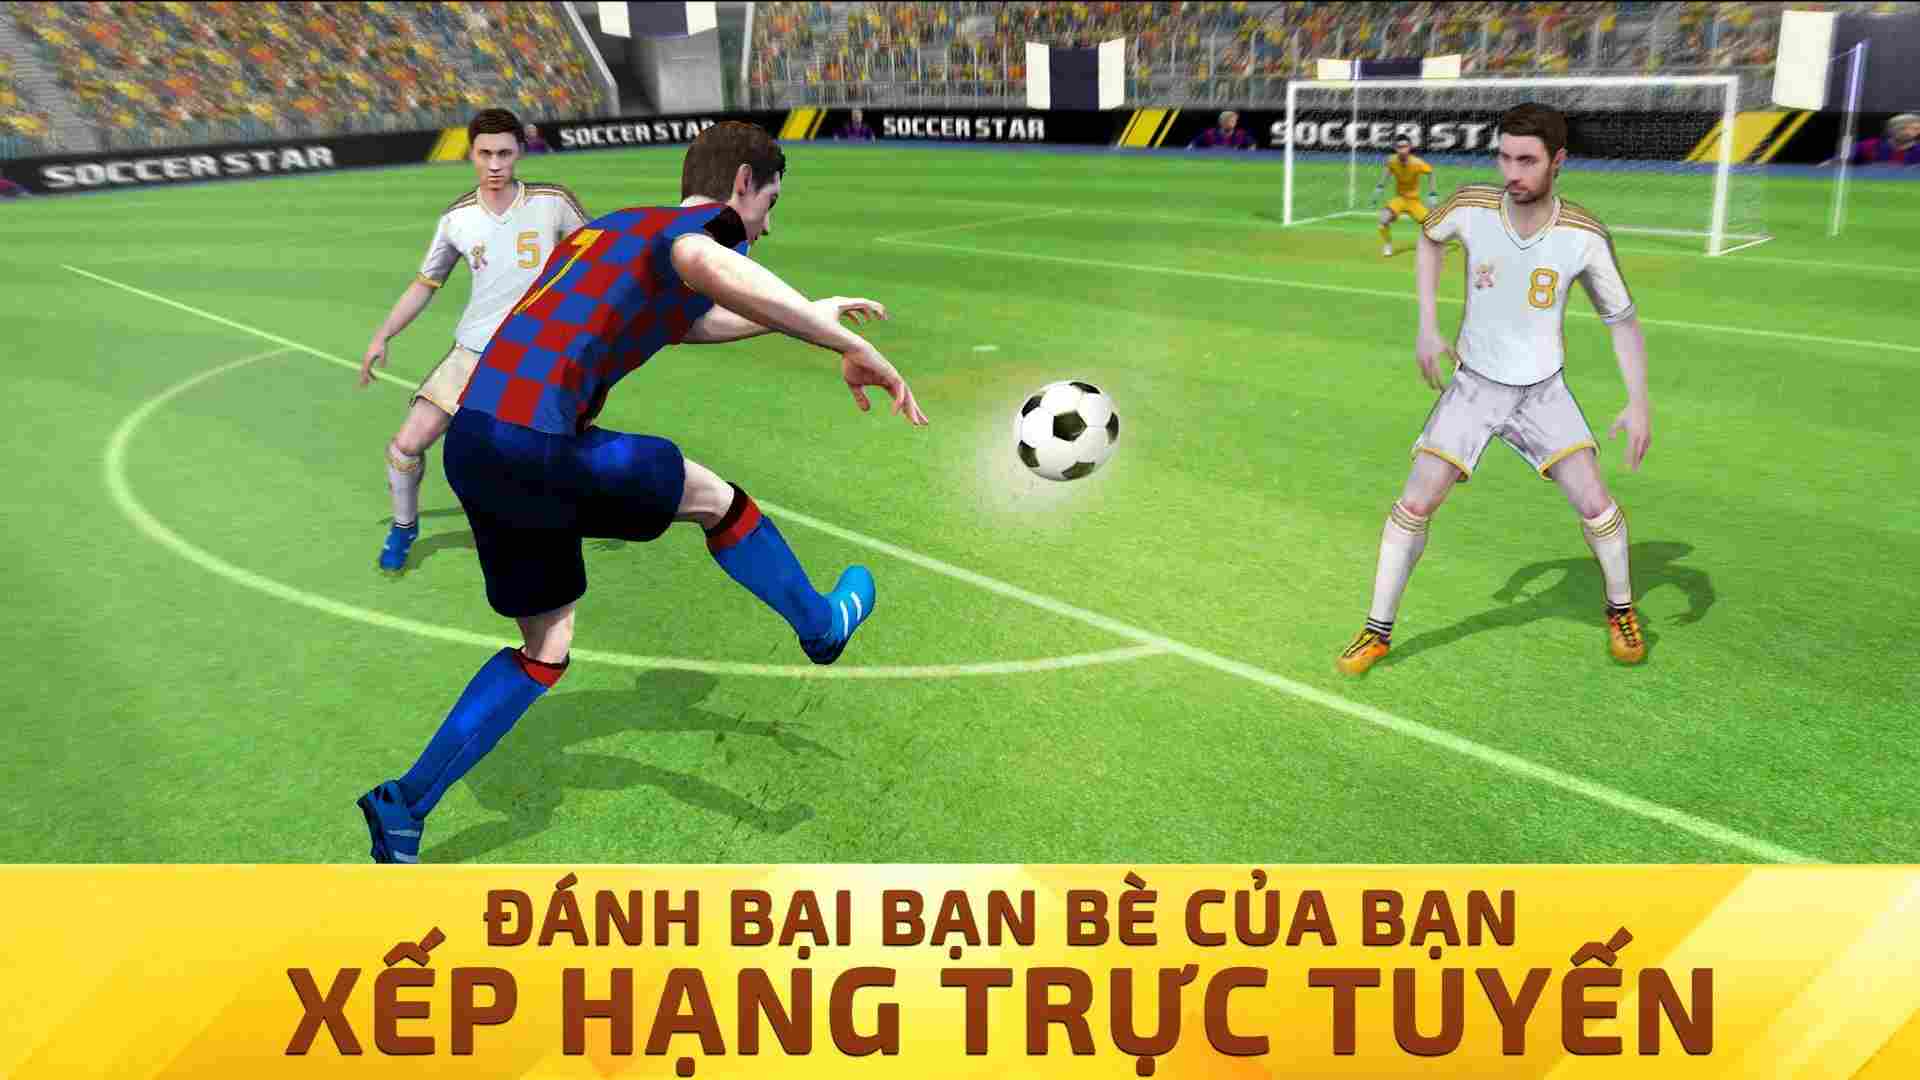 Download Soccer Star 22 Top Leagues Mod